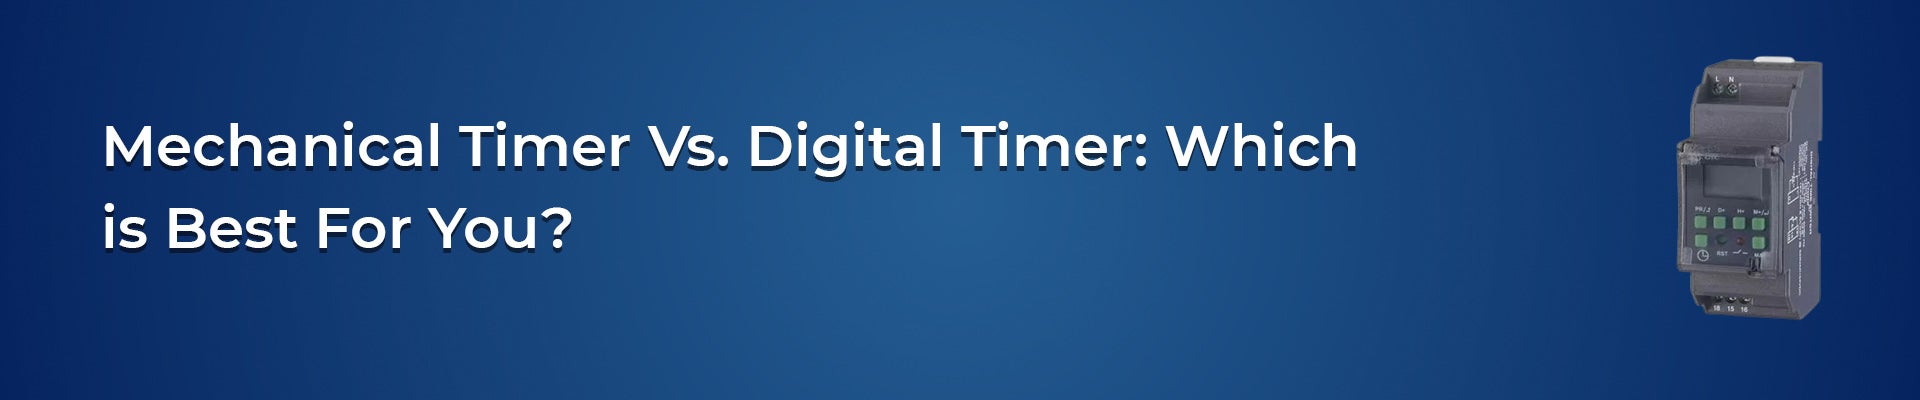 Mechanical Timer Vs. Digital Timer: Which is Best For You?